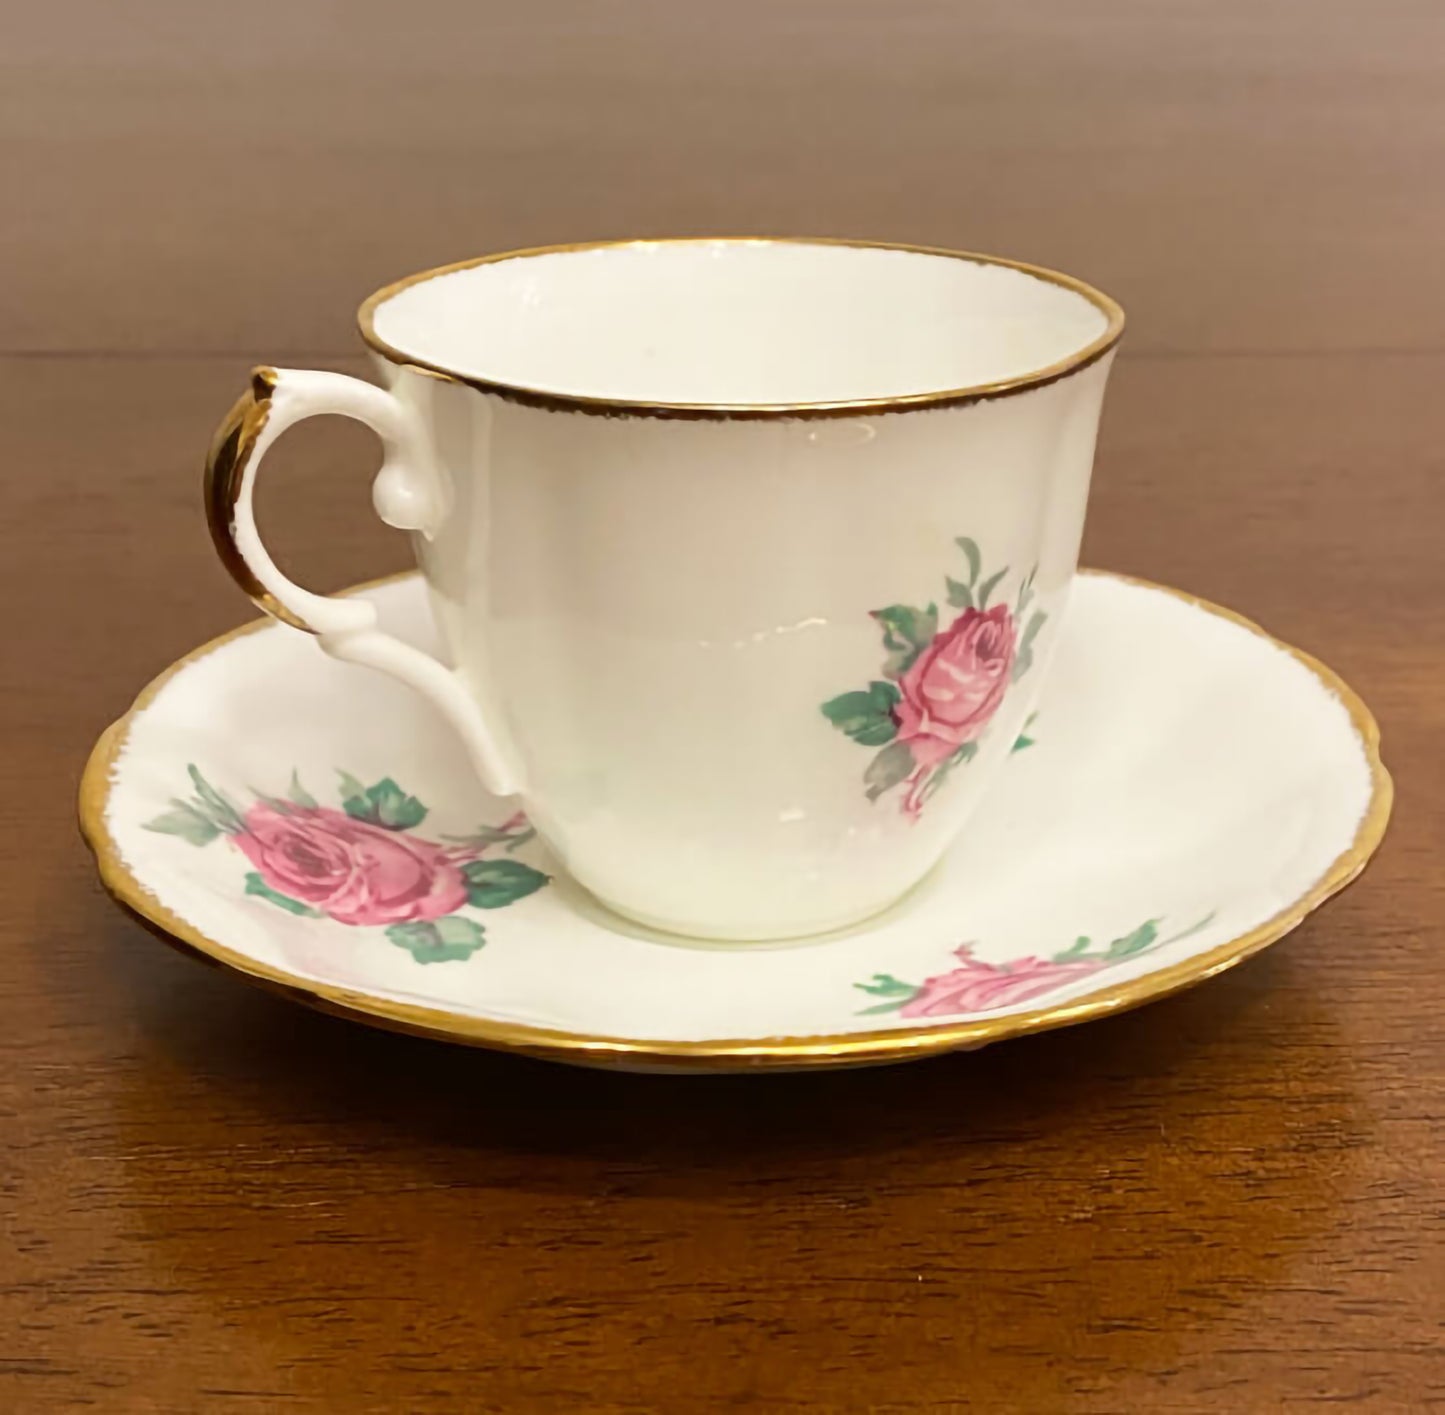 Jason-bone-china-collectible-teacup-and-saucer-set,-#J554,-featuring-pink-roses-and-green-leaves,-accented-by-gilt-trim-on-the-edge-of-the-cup-and-saucer.-Side-view.-Excellent-condition.-Makes-a-great-gift.-Shop-eBargainsAndDeals.com.